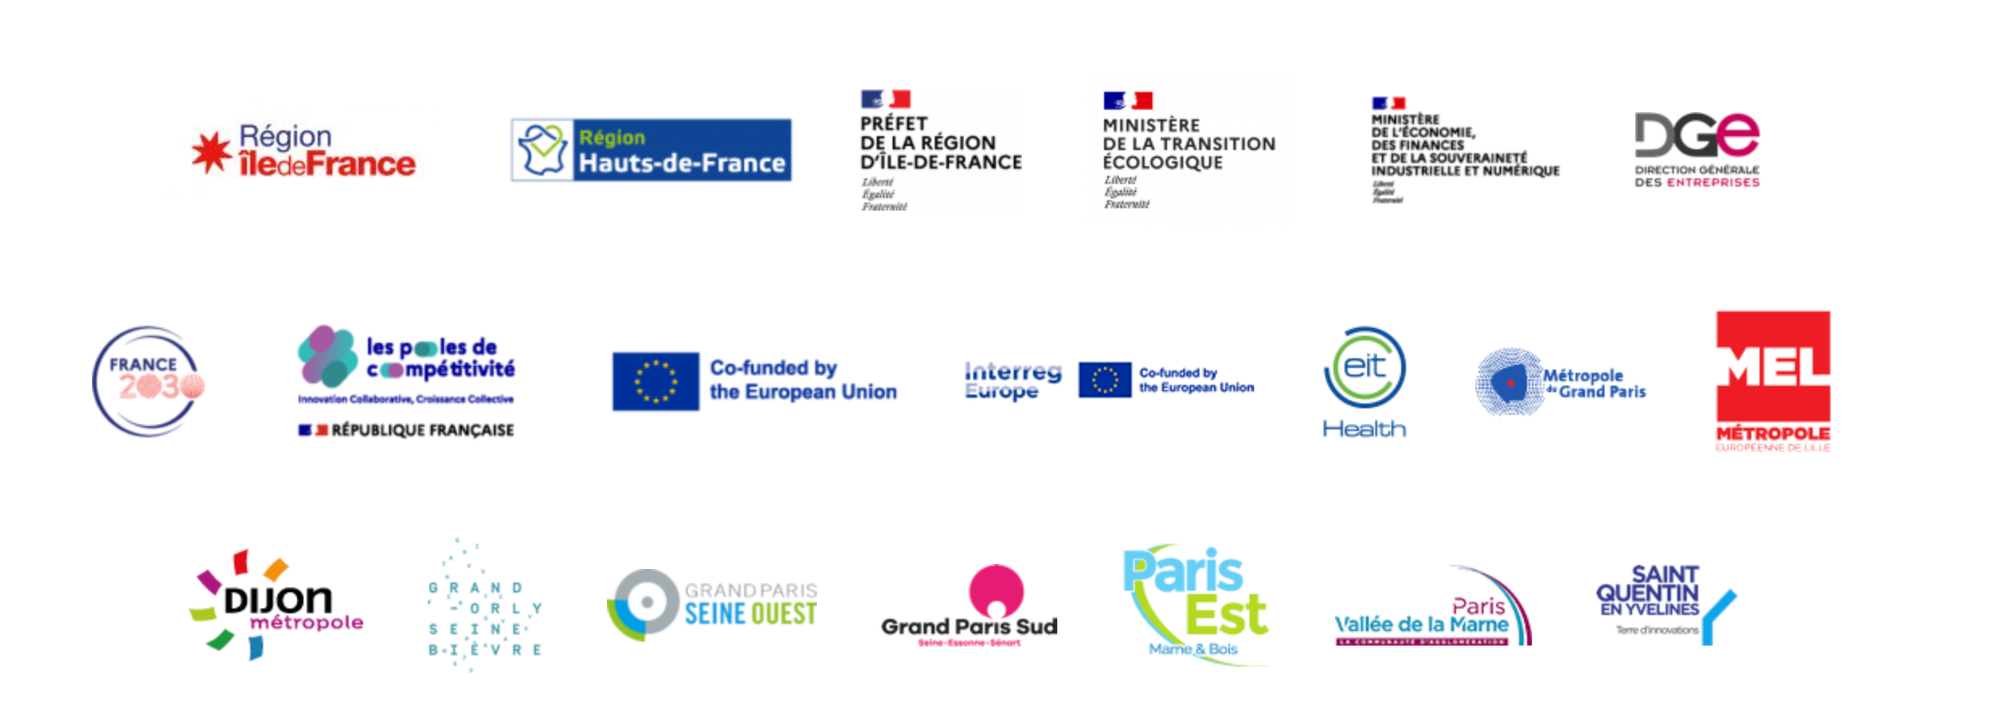 The cluster is supported by various public institutions across France and Europe